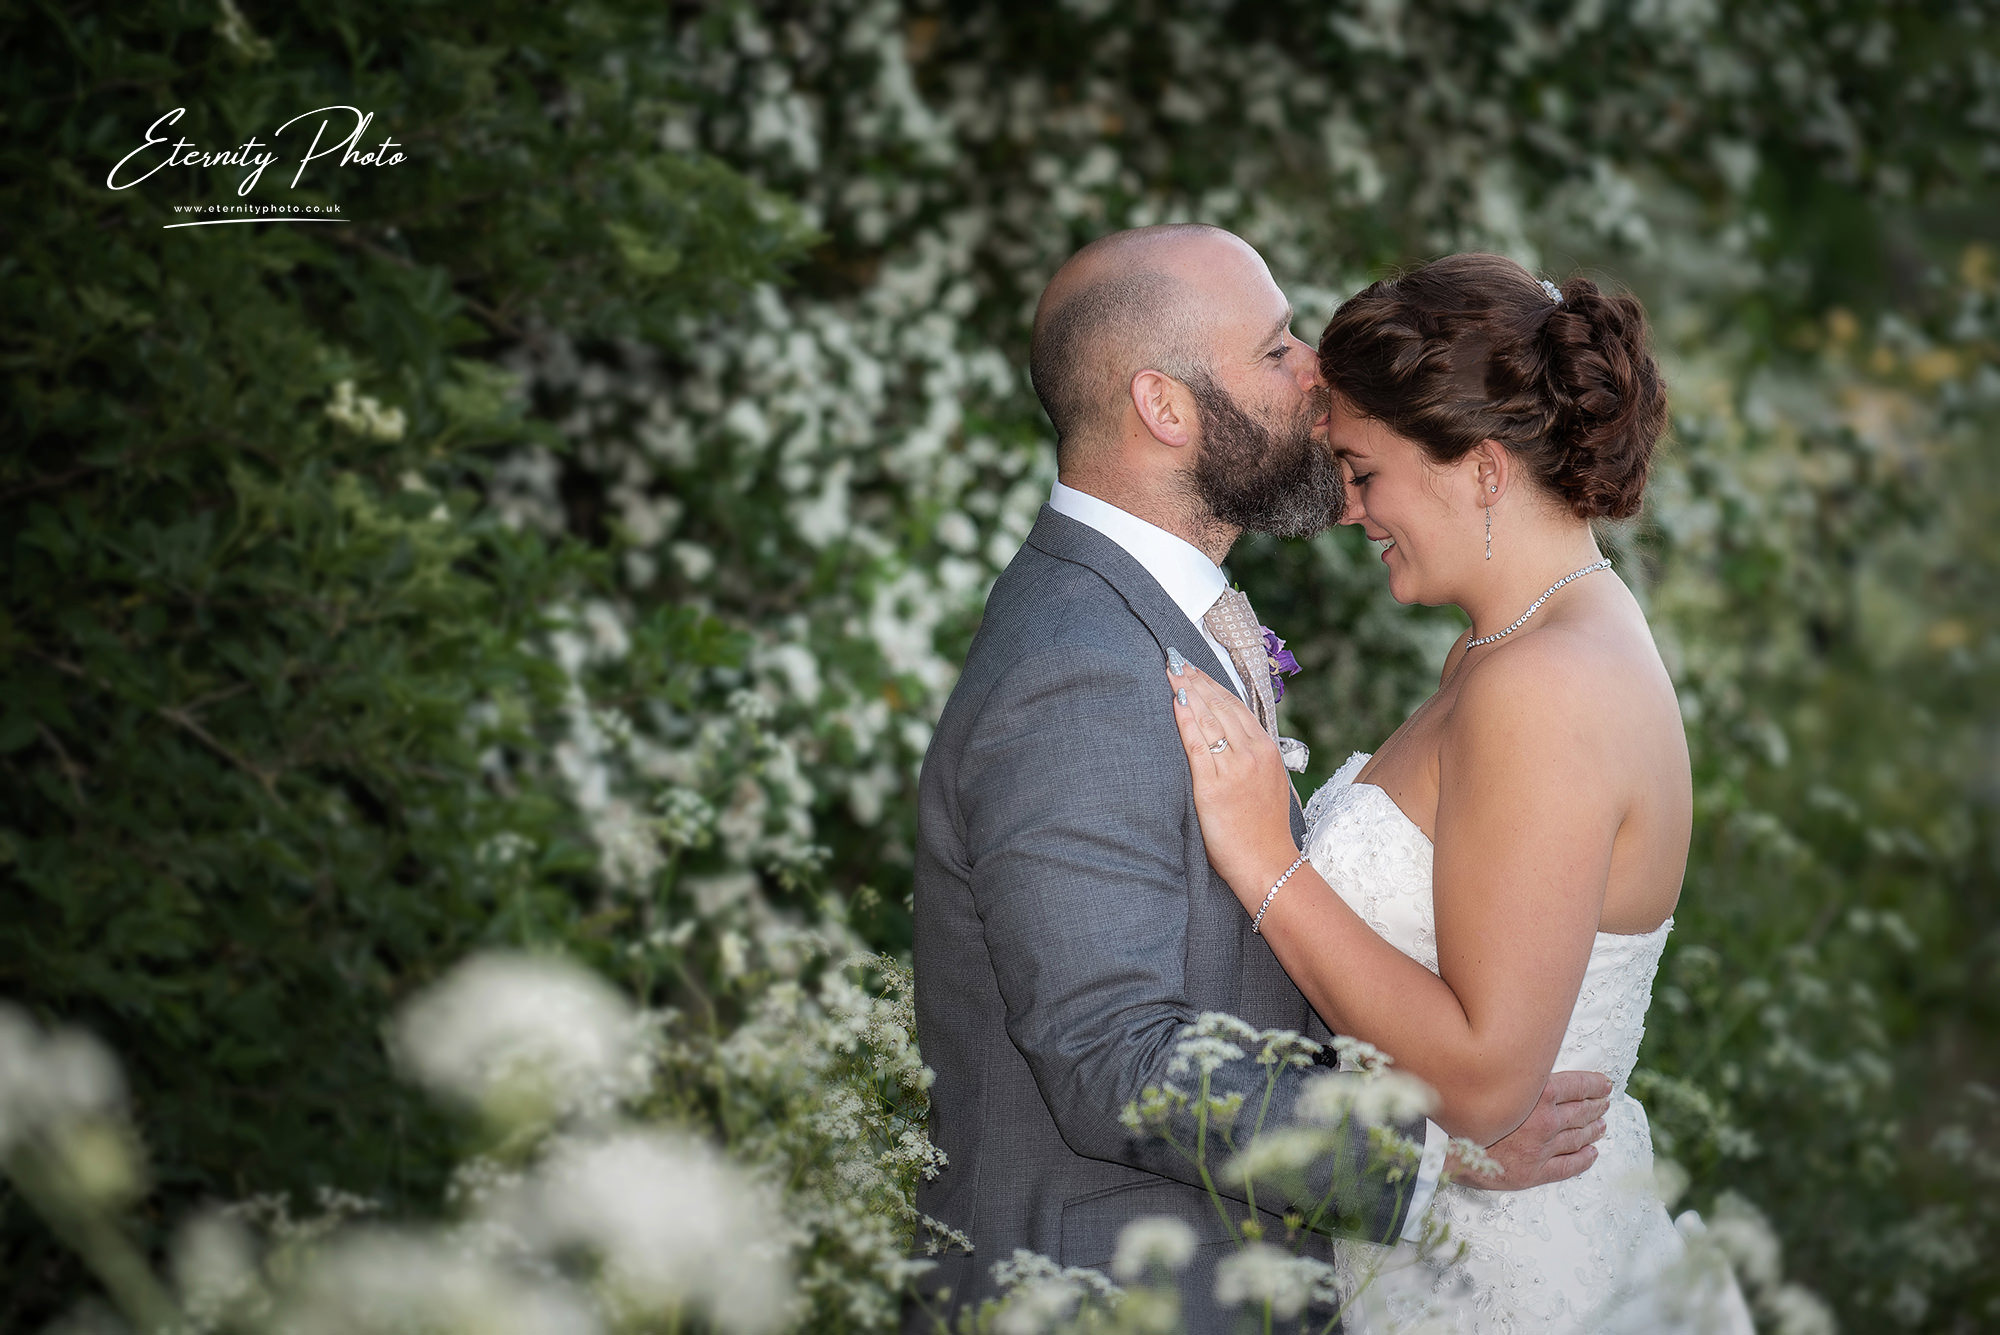 Couple embracing at a floral outdoor wedding.